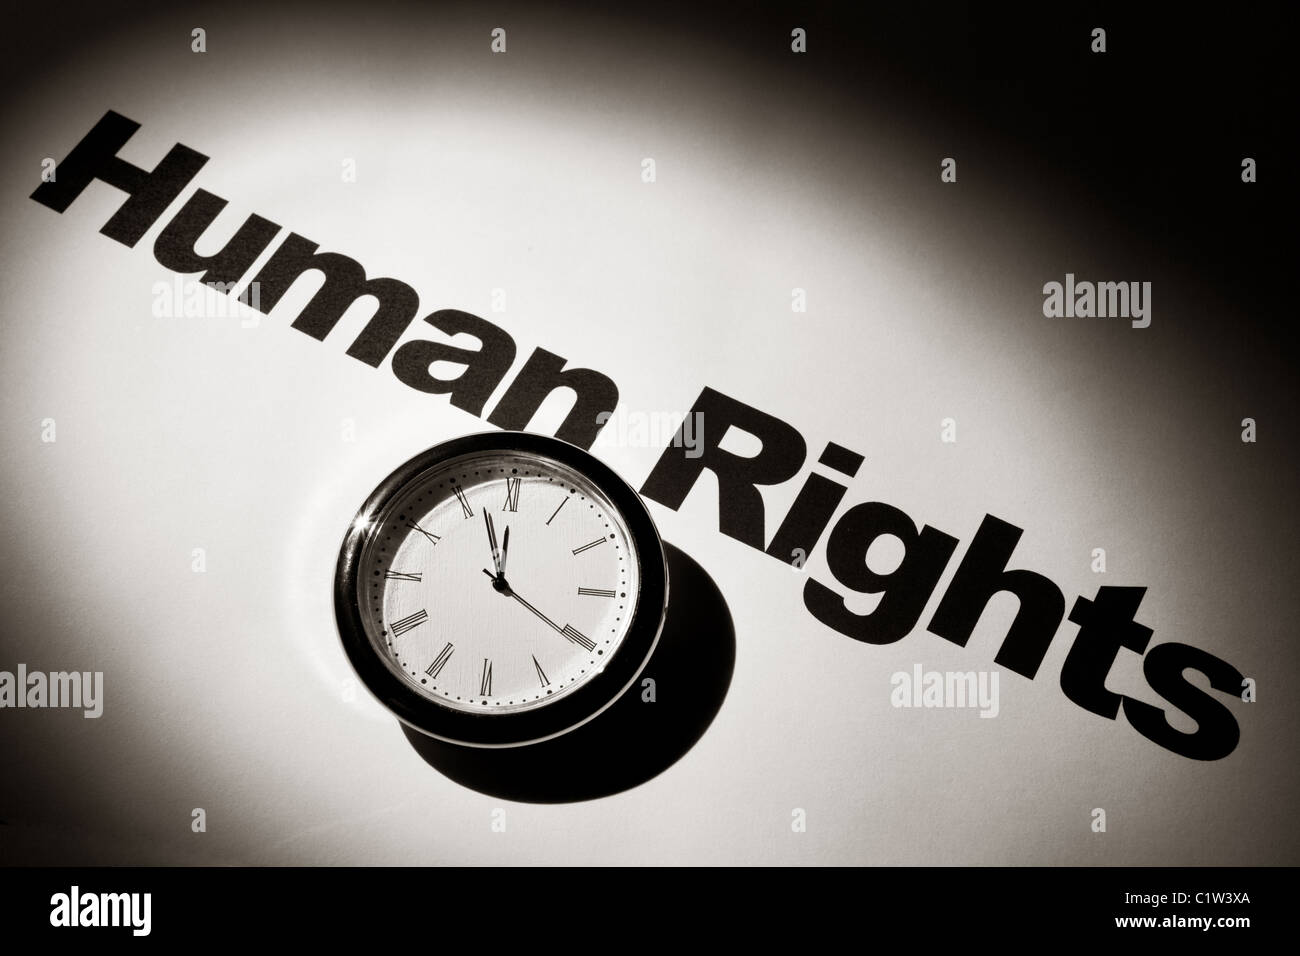 Clock and word of Human Rights for background Stock Photo